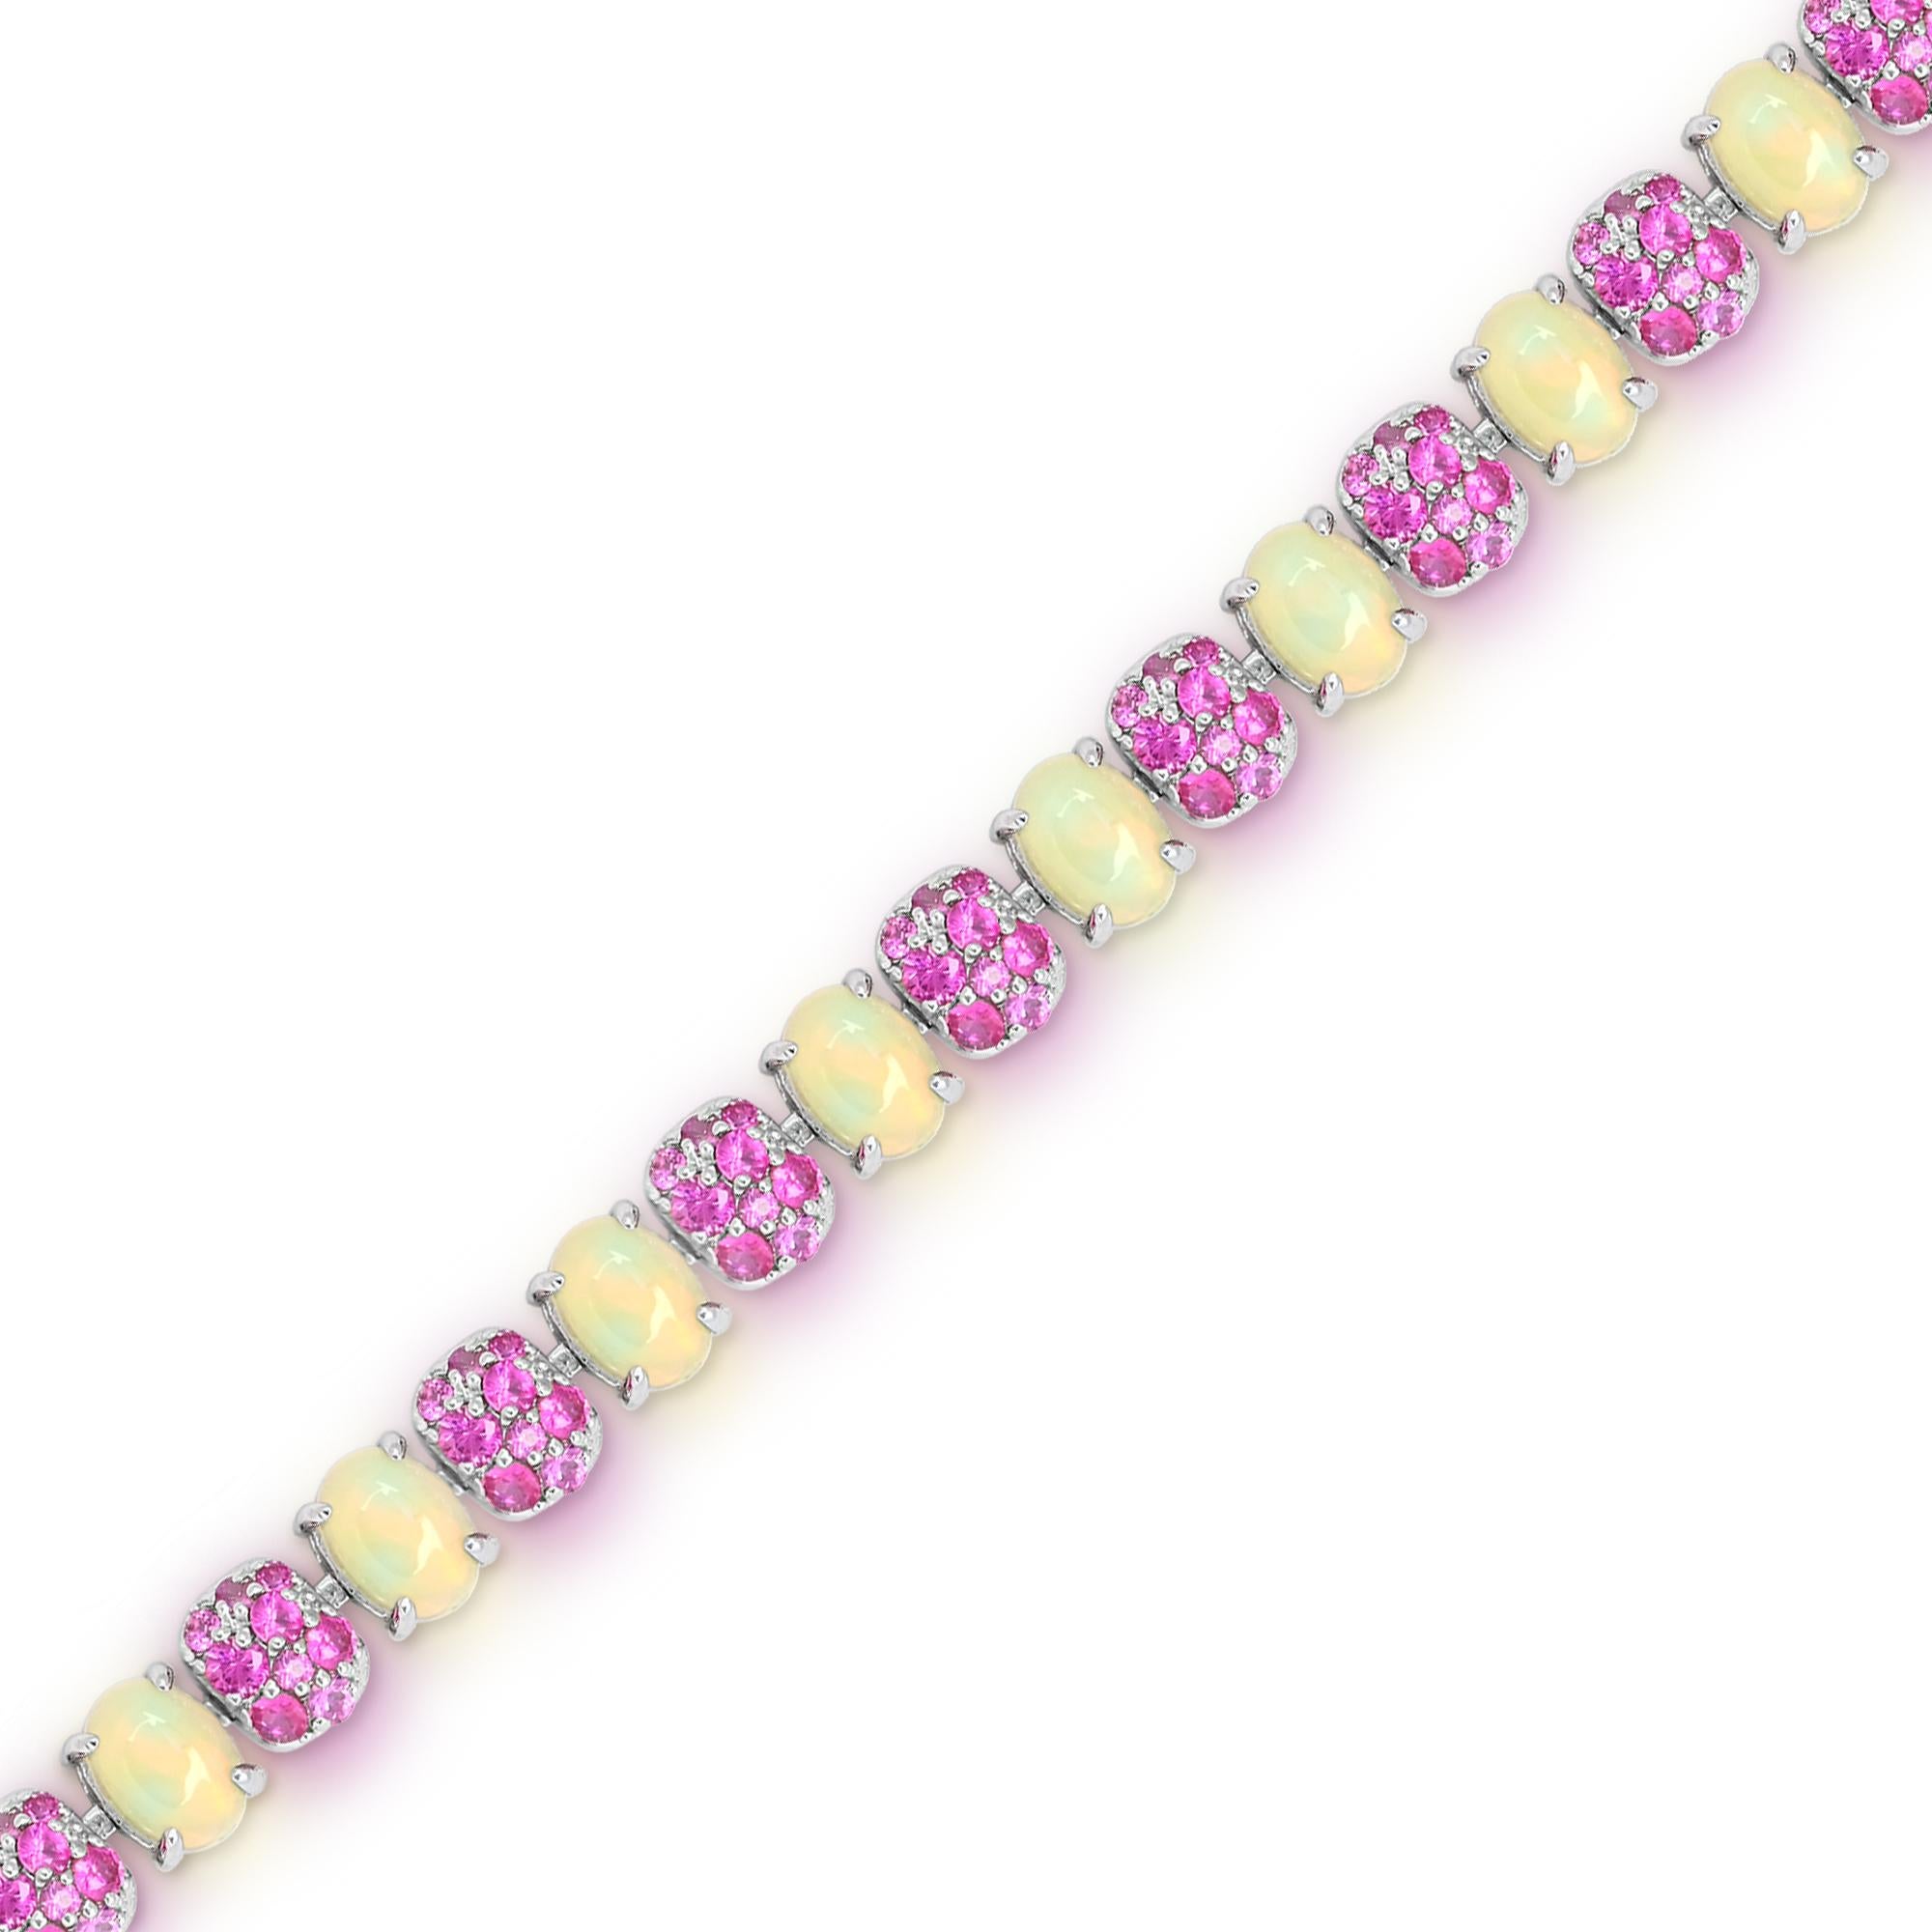 Indulge in the captivating beauty of our Sterling Silver Opal and Cluster Setting Pink Sapphire Bracelet. This exquisite piece features 15 oval-cut opal and 126 pieces of various sizes pink sapphire gemstones, delicately set in sterling silver. The